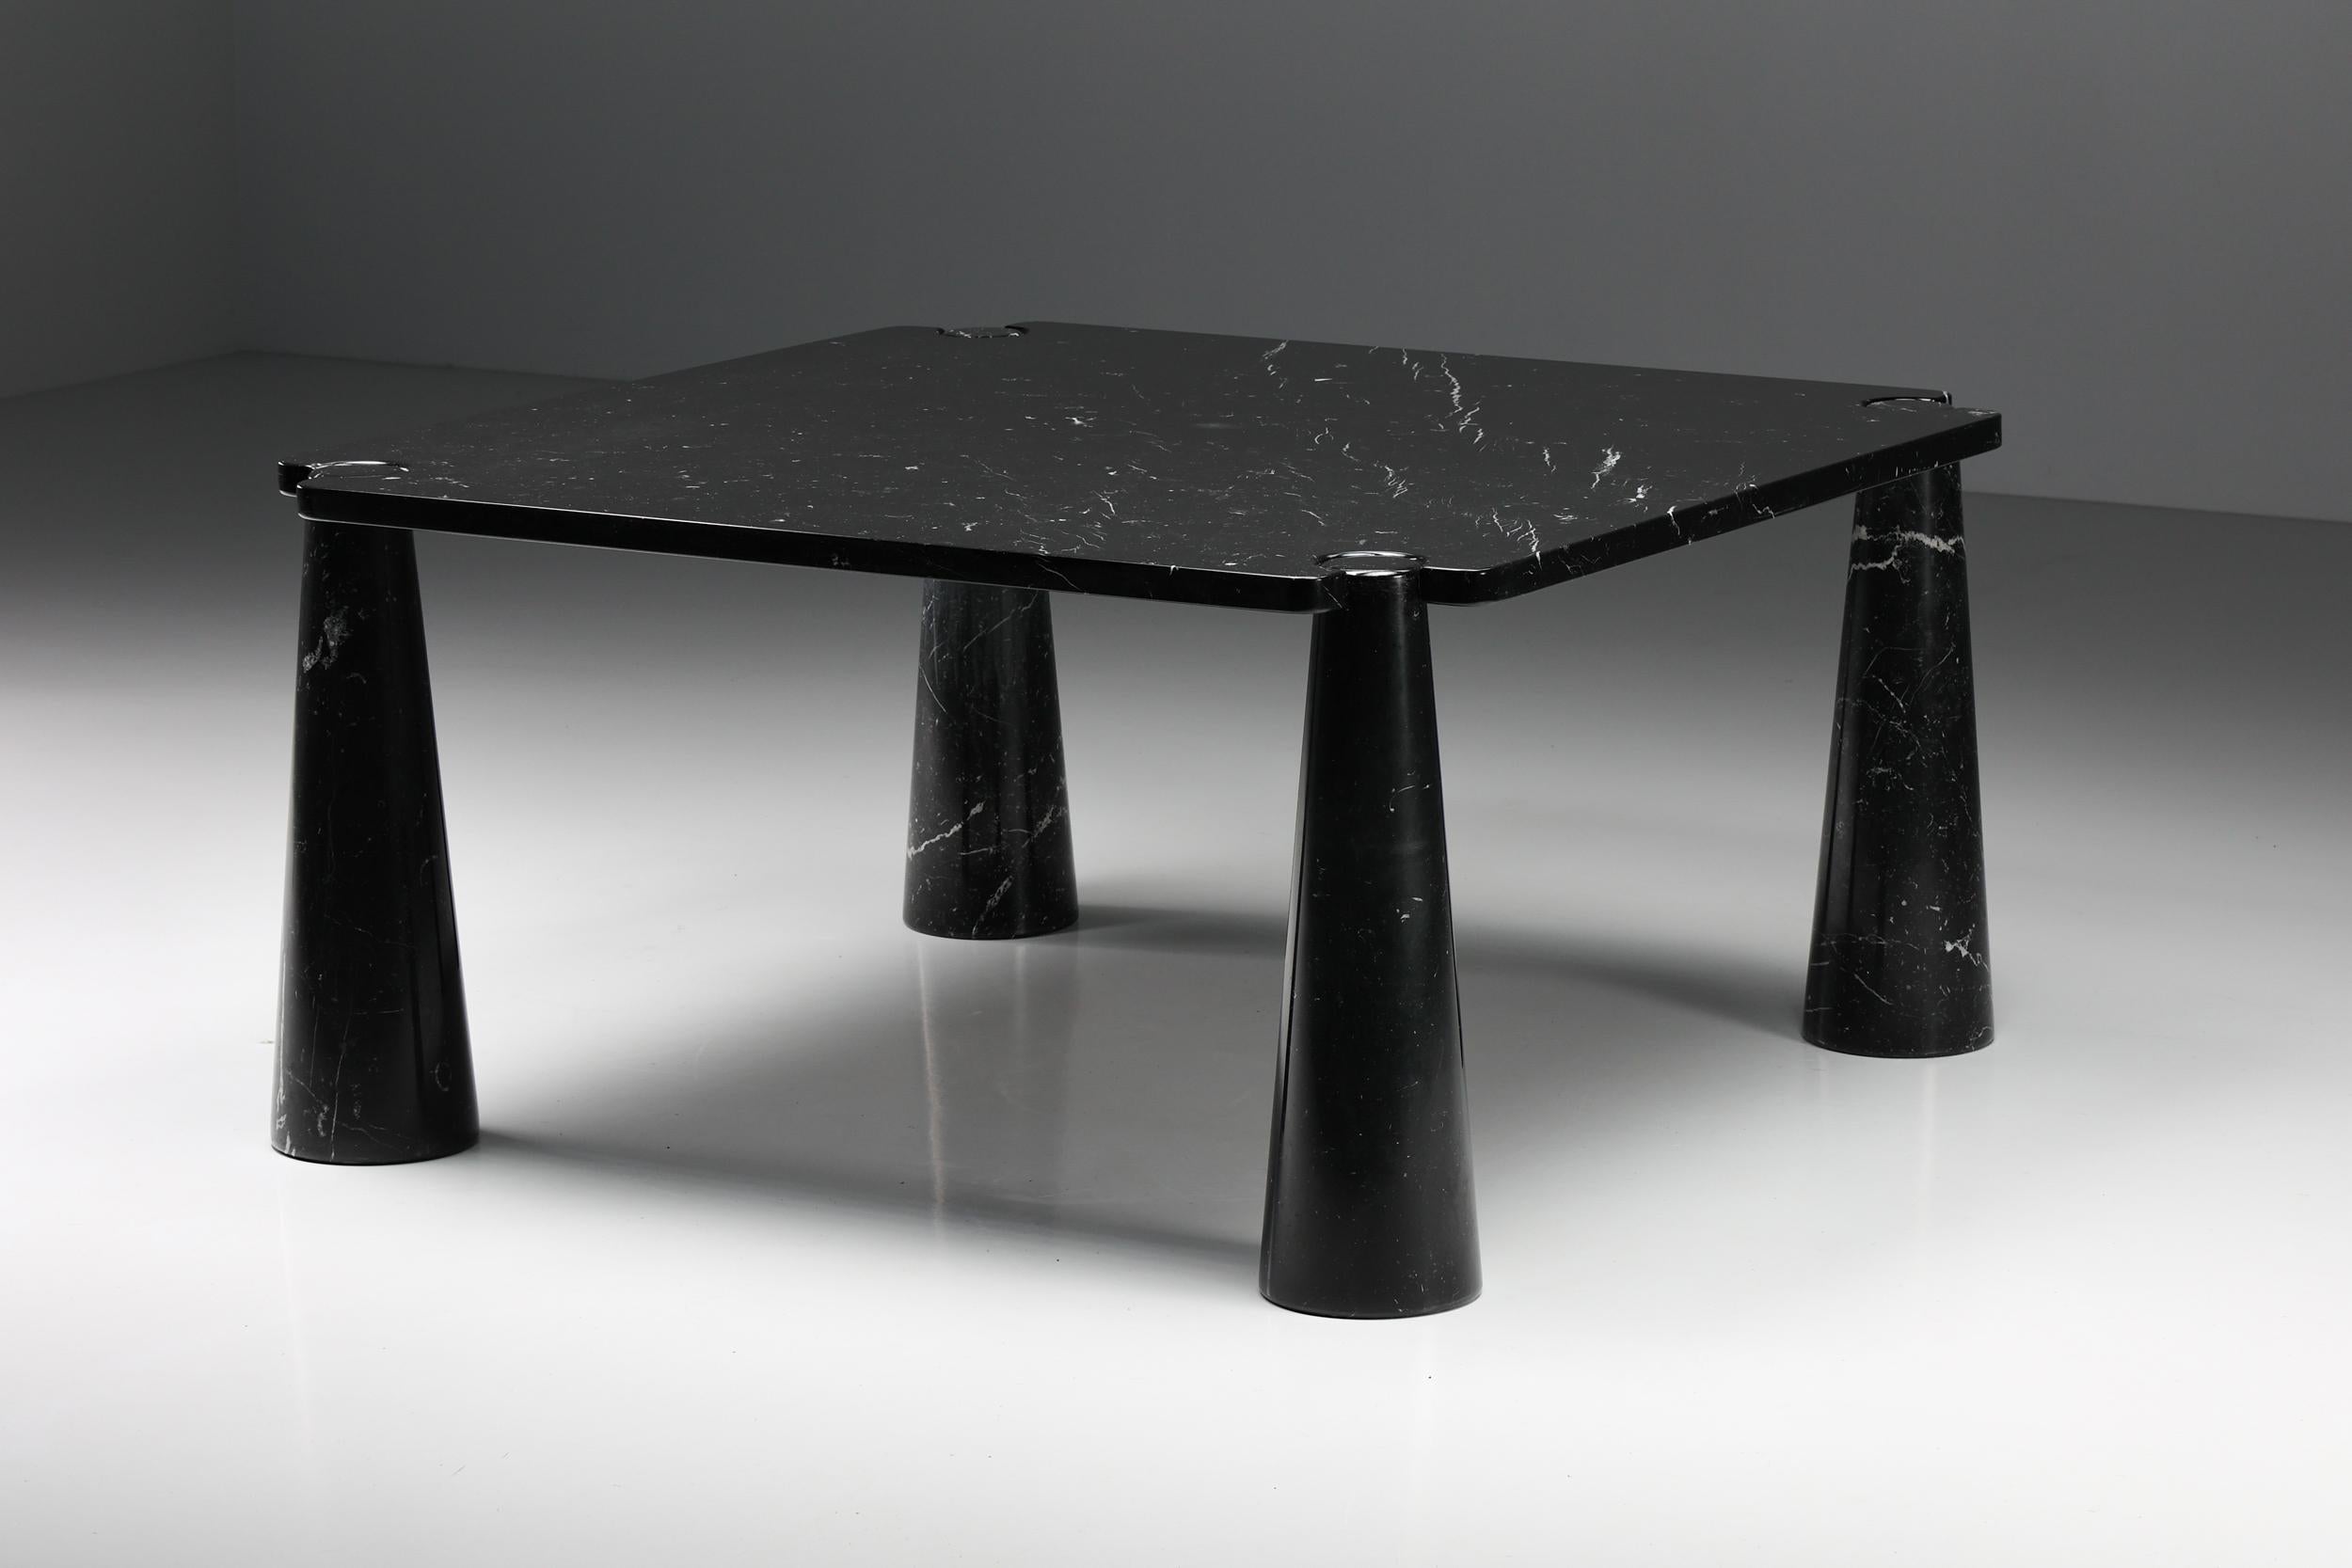 Angelo Mangiarotti; Dining Table; Black Marble; 1970s Design; Post-modern, Skipper; Sculptural; Architectural; Eros; Italy; Italian Design; Square Dining Table; Postmodern Design; 

Rare square version of the dining table produced by Skipper. This